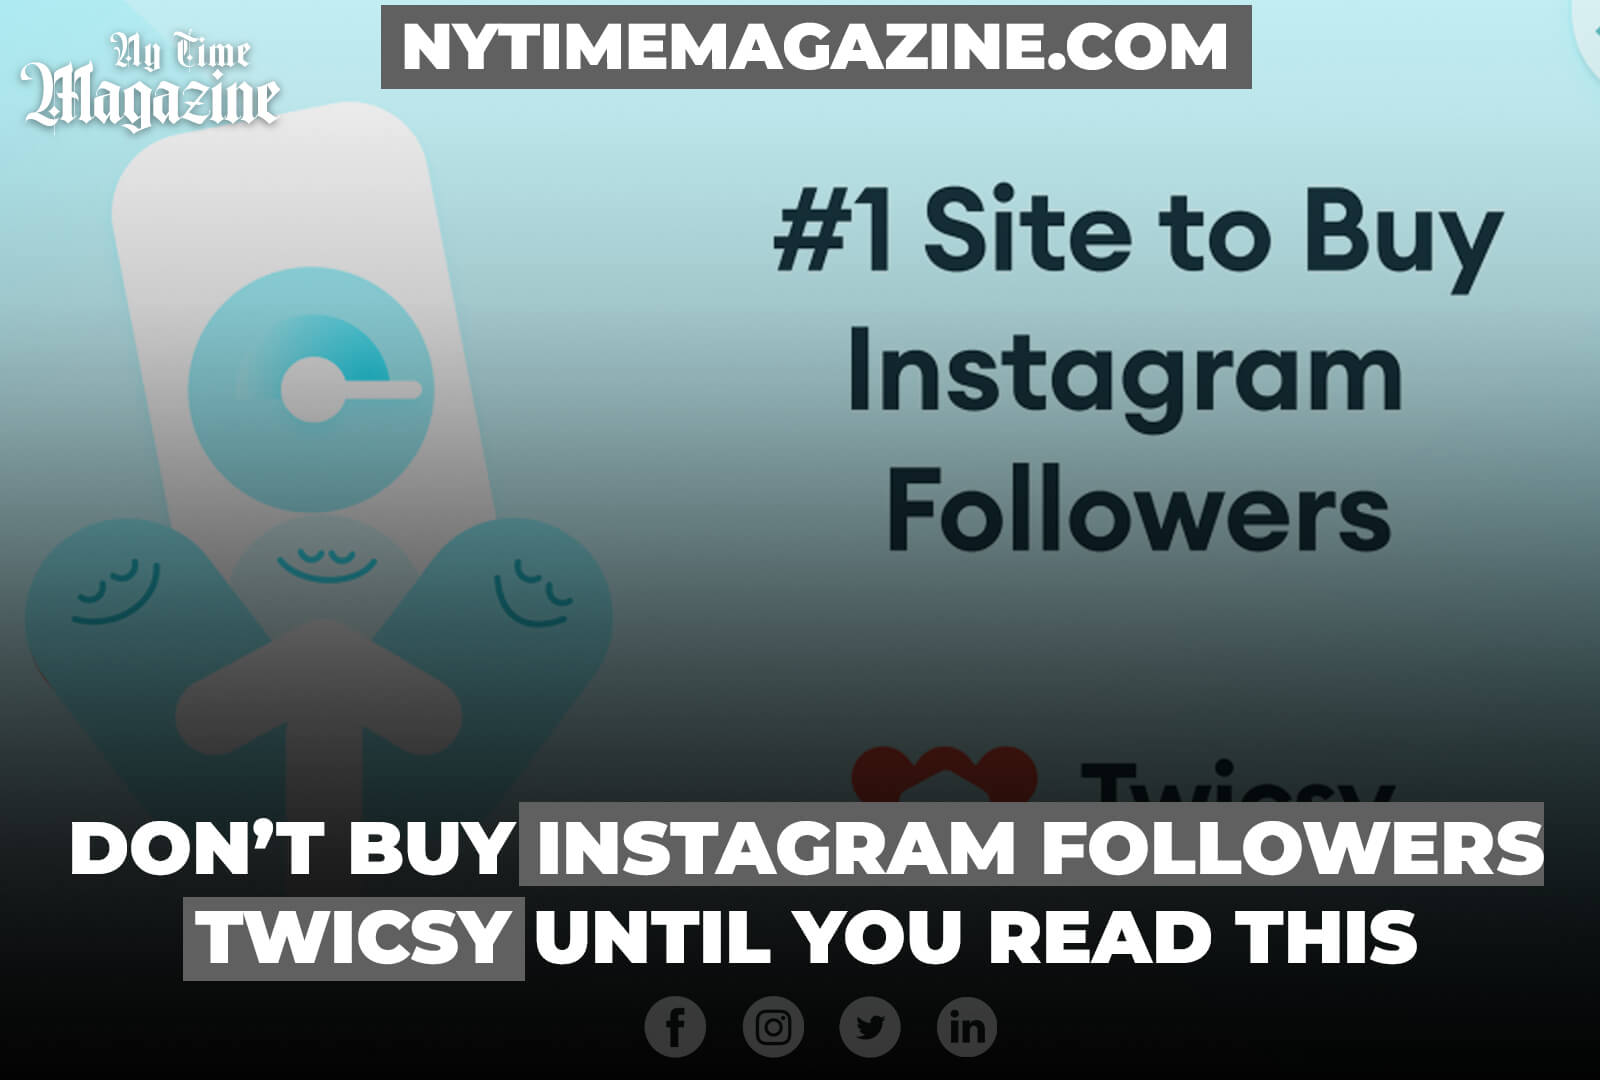 DON’T BUY INSTAGRAM FOLLOWERS TWICSY UNTIL YOU READ THIS